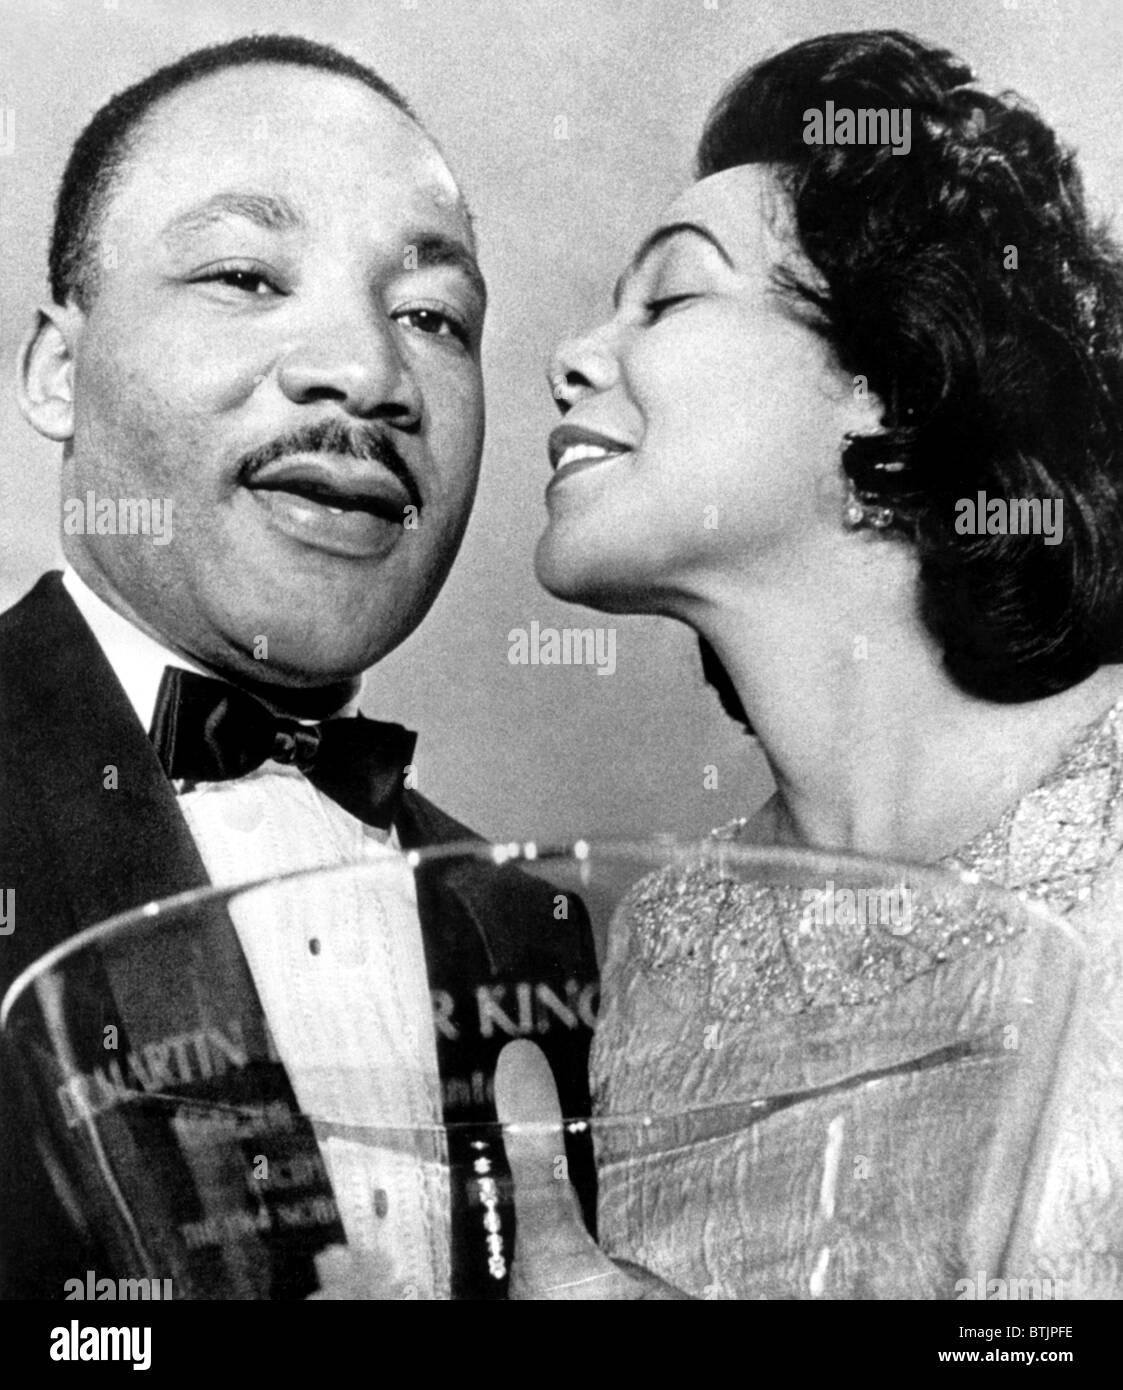 Dr. Martin Luther King Jr., being congratulated by wife Coretta <b>Scott King</b>, - dr-martin-luther-king-jr-being-congratulated-by-wife-coretta-scott-BTJPFE